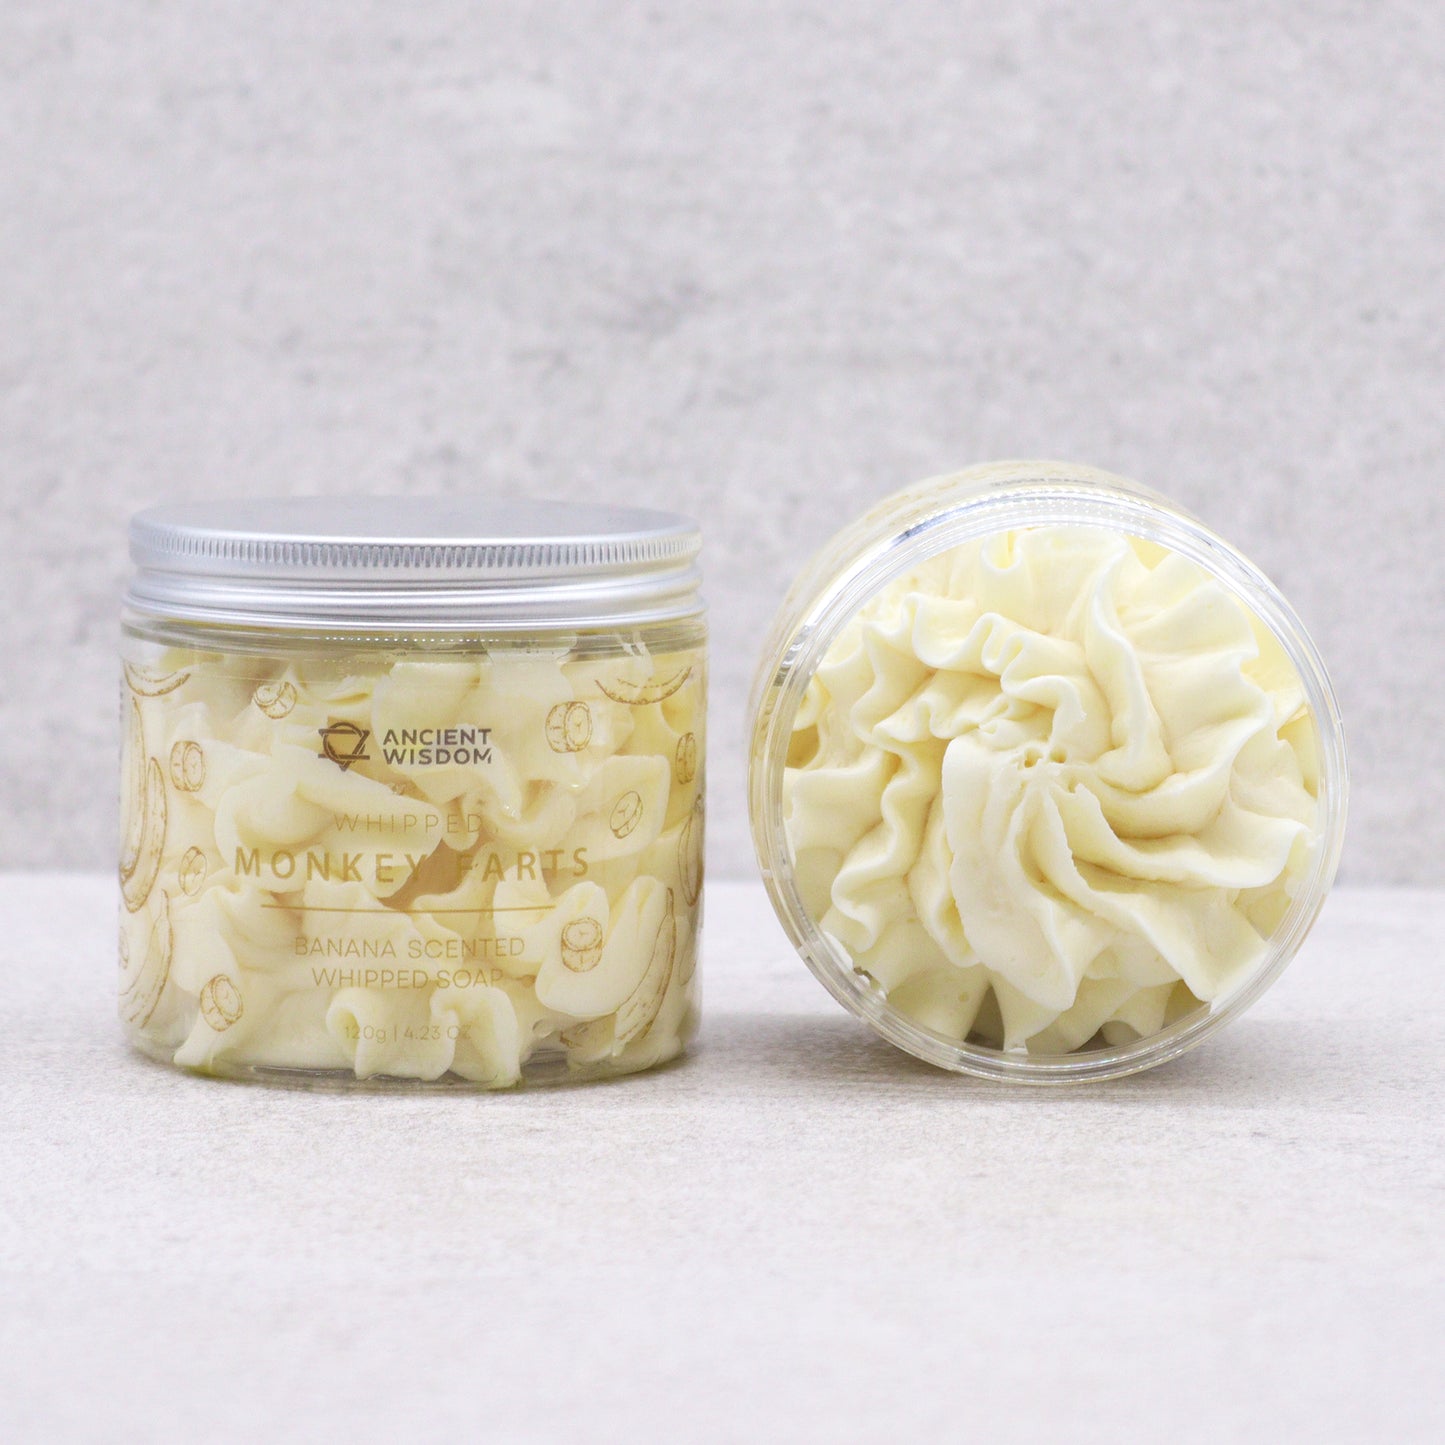 whipped soap banana monkey farts  120 g jar cruelty free paraben free sls free vegan friendly handcrafted in the uk suitable for all skin types moisturising exfoliating hydrating versatile use as body wash body scrub or shaving soap